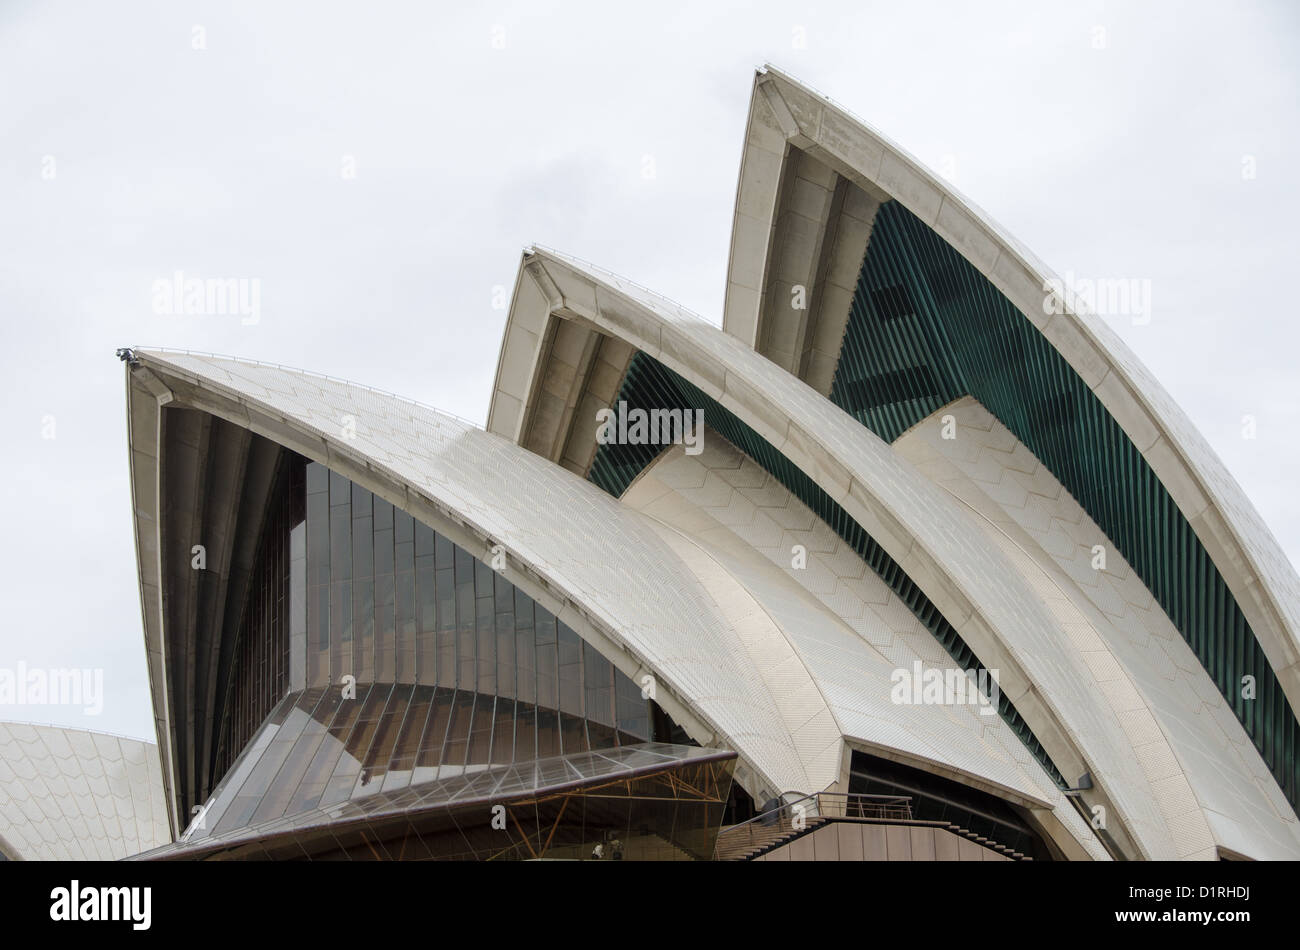 SYDNEY, Australia - SYDNEY, Australia - The distinctive sails of the roof of the Sydney Opera House as seen from the harbor. The iconic building is situated prominently in Sydney Harbour, Sydney, Australia. Stock Photo